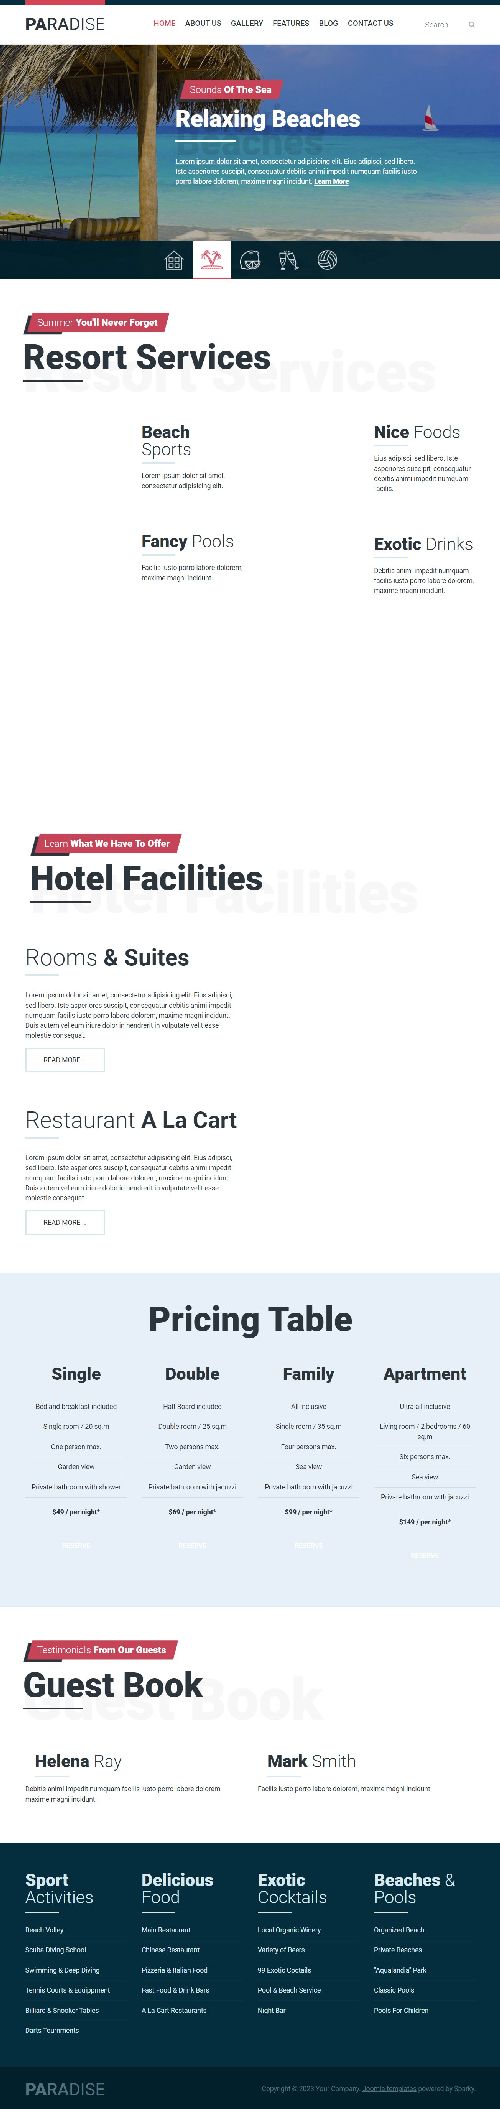 Paradise - Joomla 4 Template for Hotels and Summer Resorts